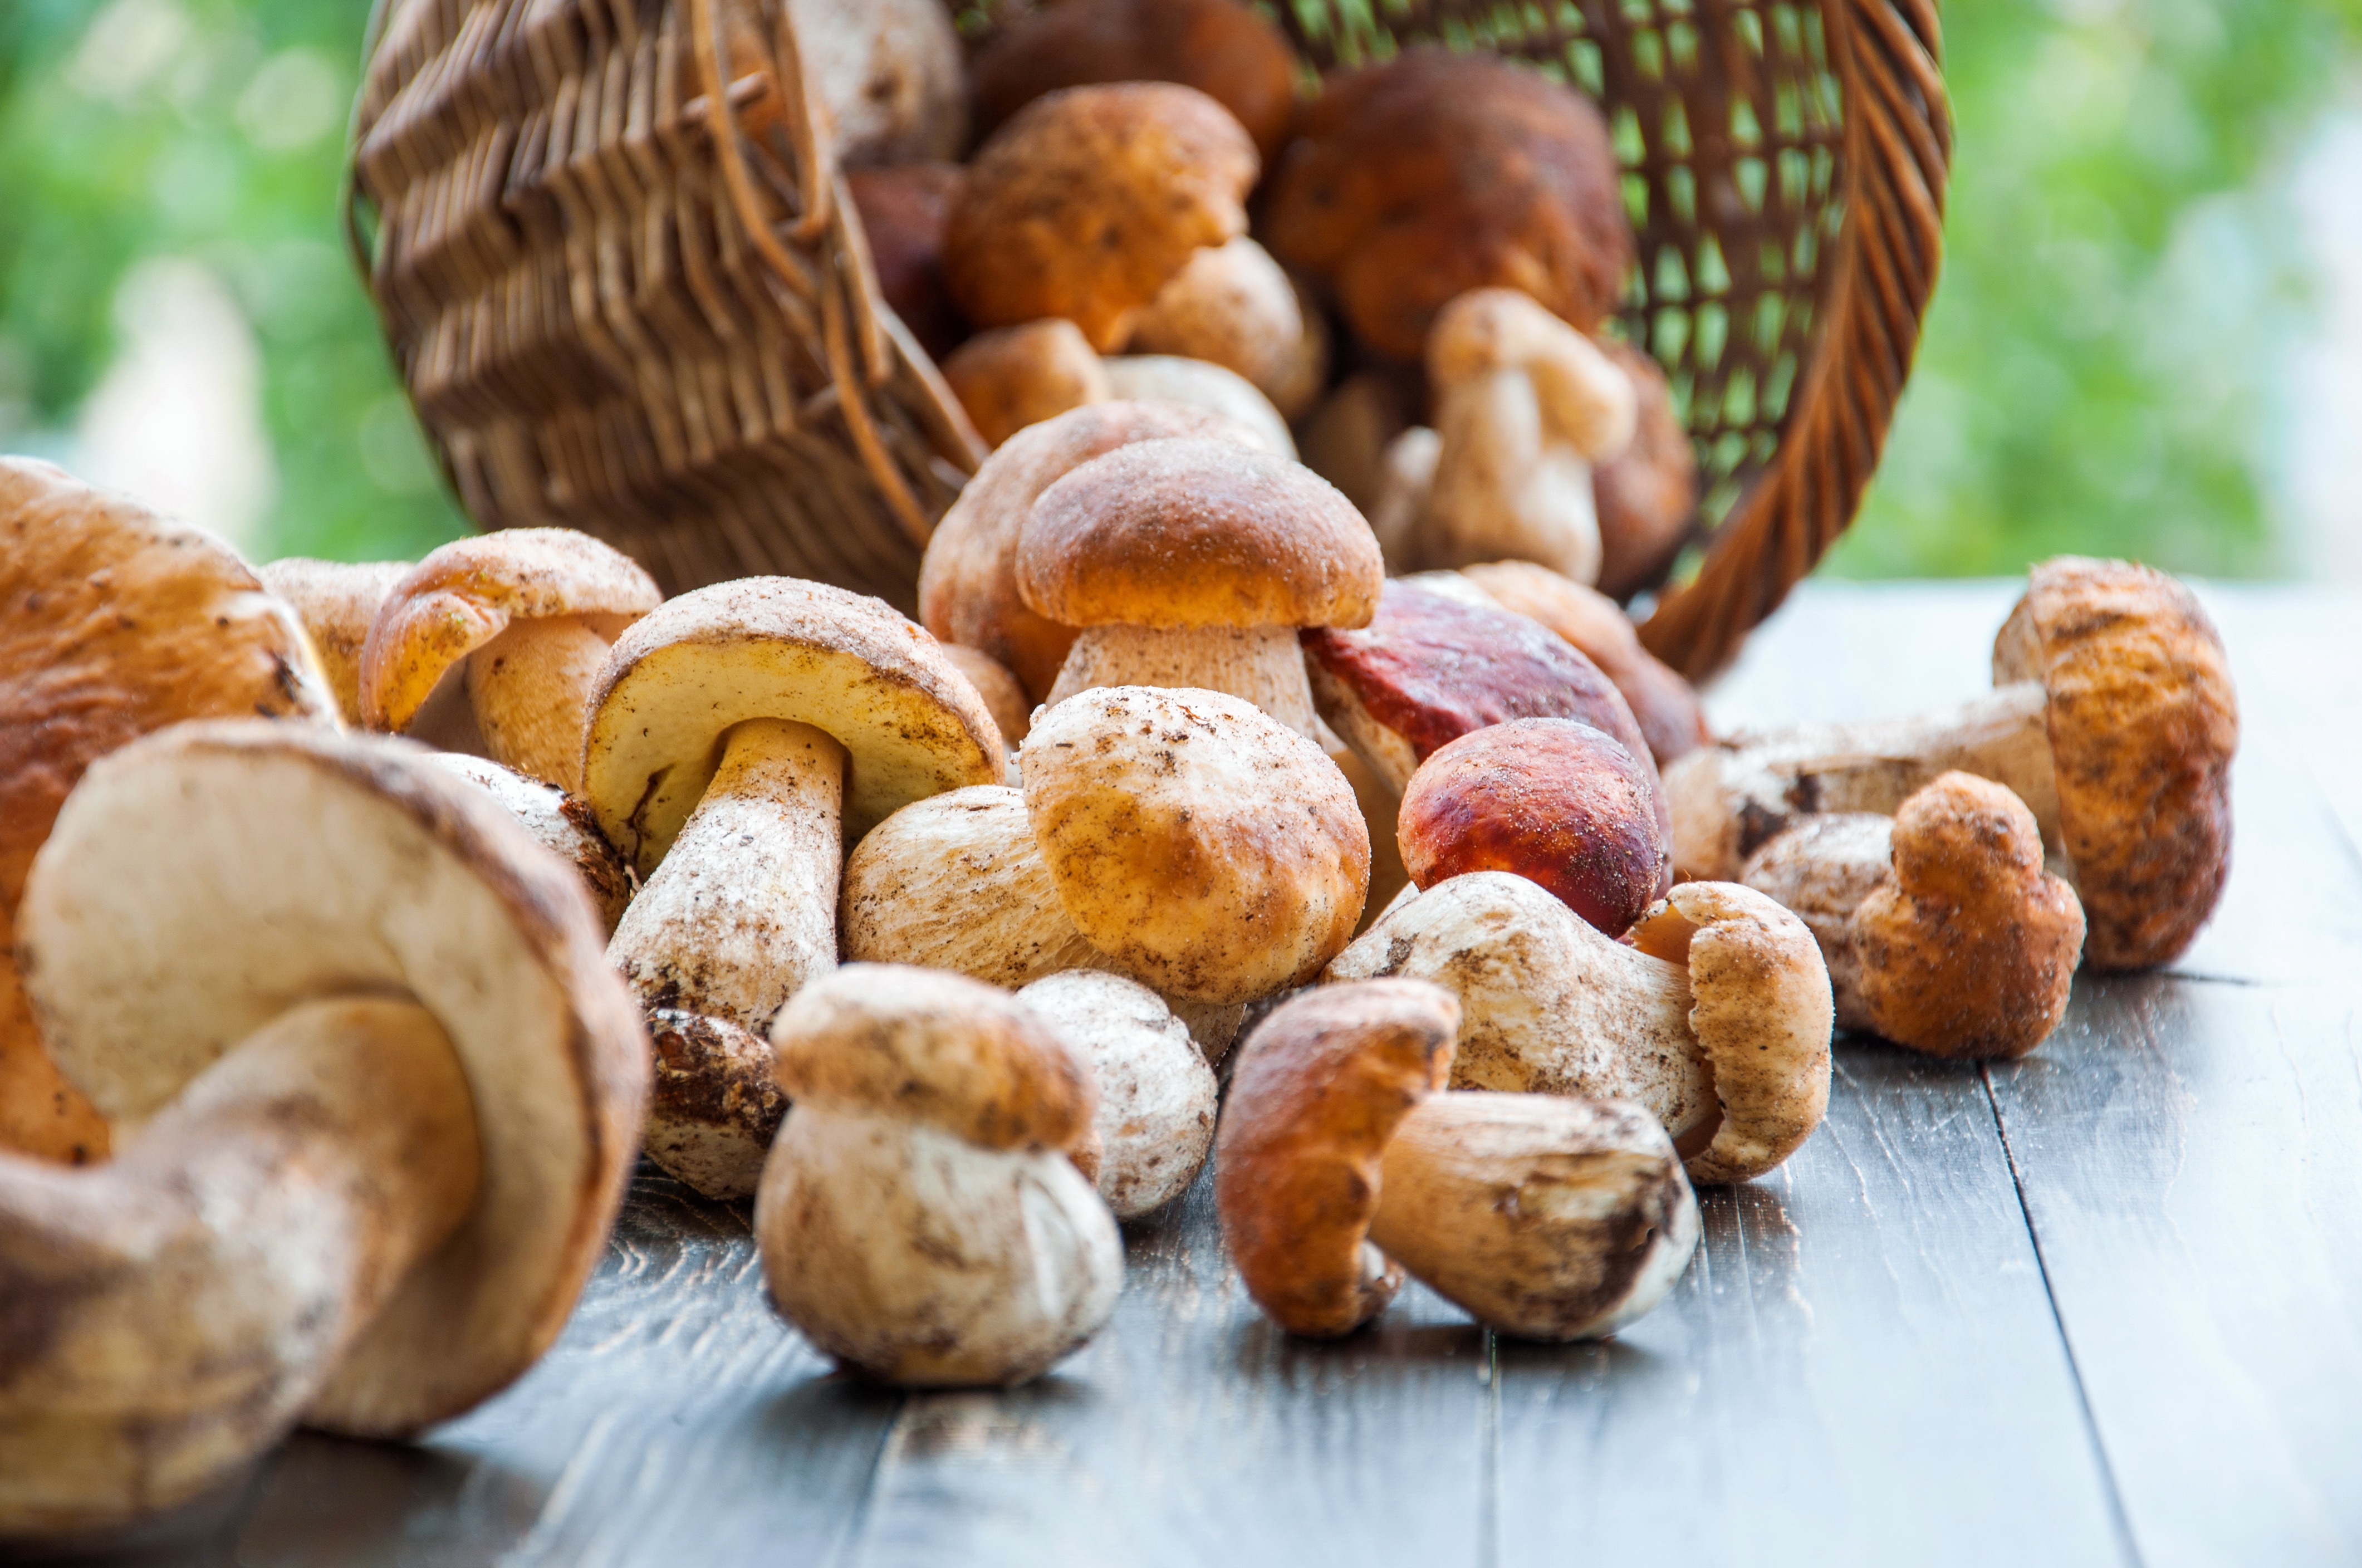 Growing sustainable everyday products using mushrooms